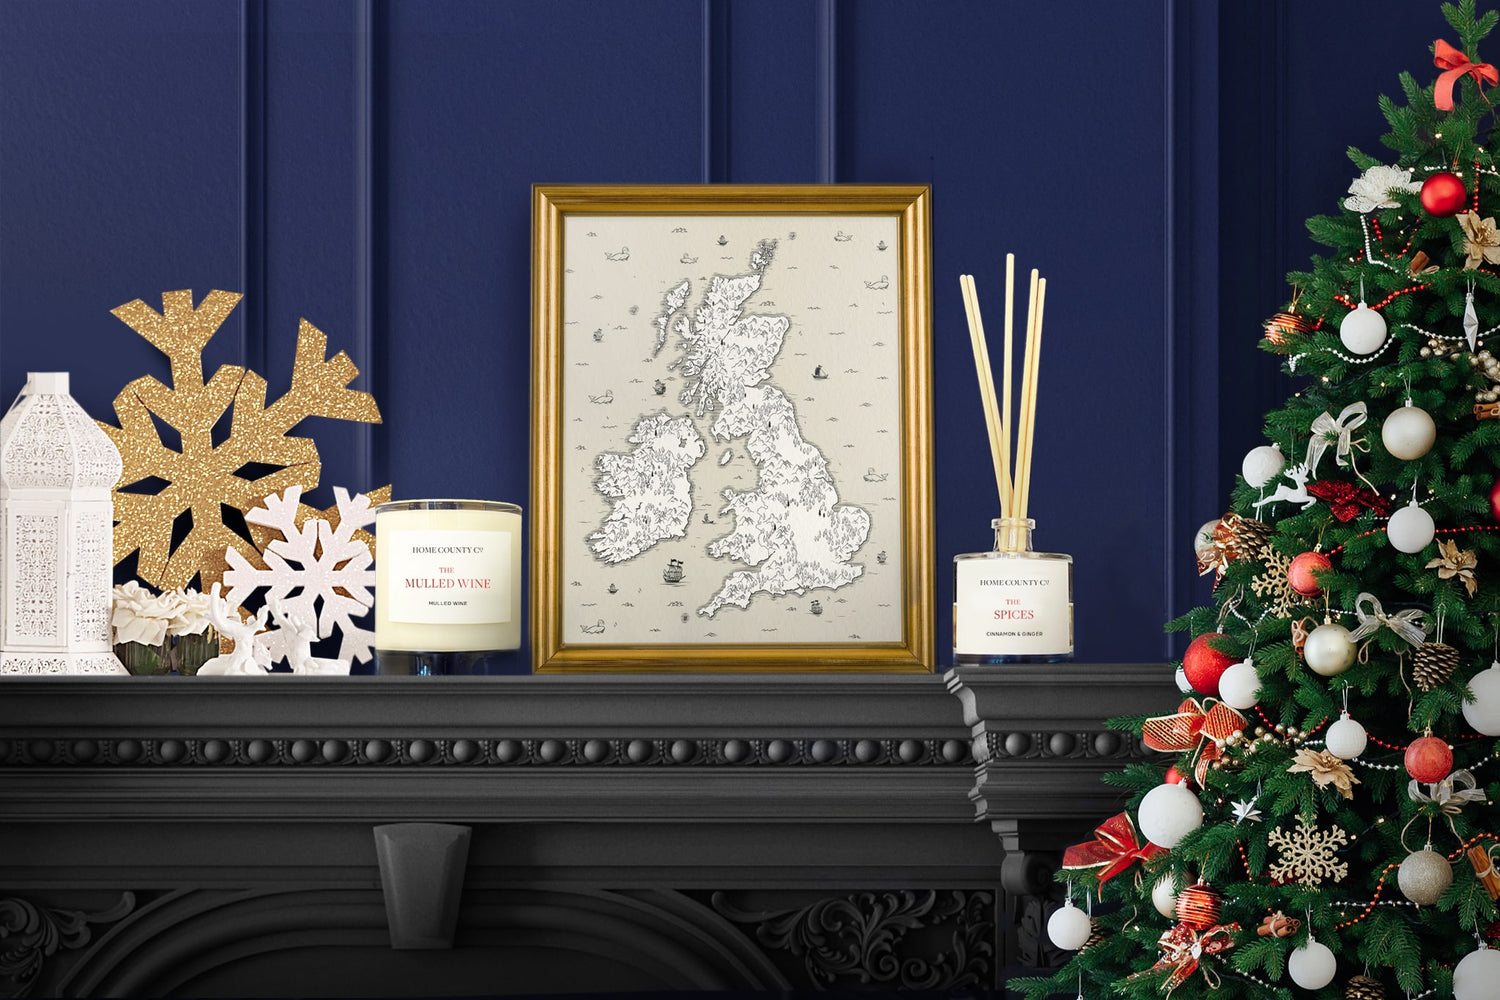 A Mulled Wine scented candle and a Cinnamon reed diffuser from the Home County Co are shown on a mantelpiece surrounded by Christmas decorations